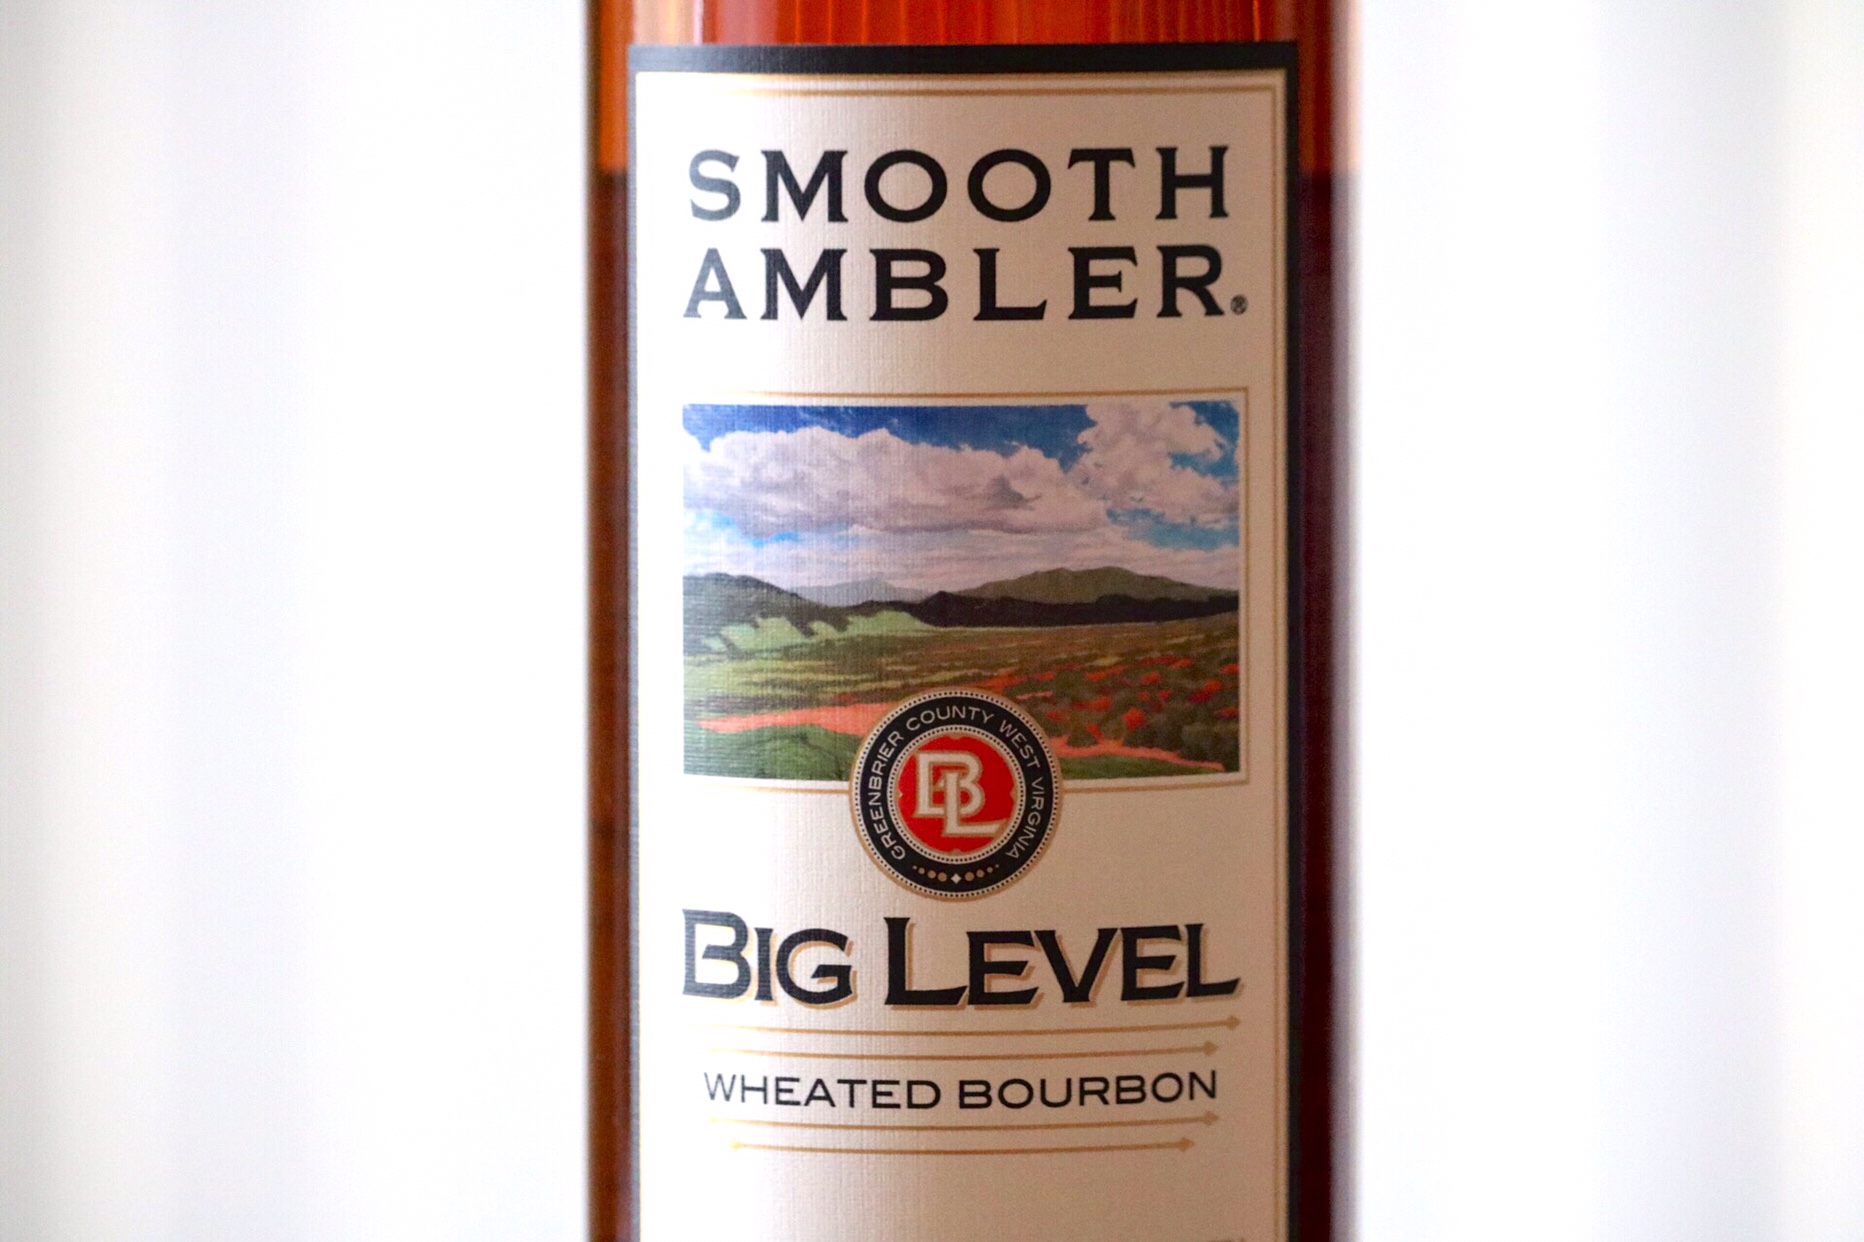 You are currently viewing Smooth Ambler Big Level Wheated Bourbon Review